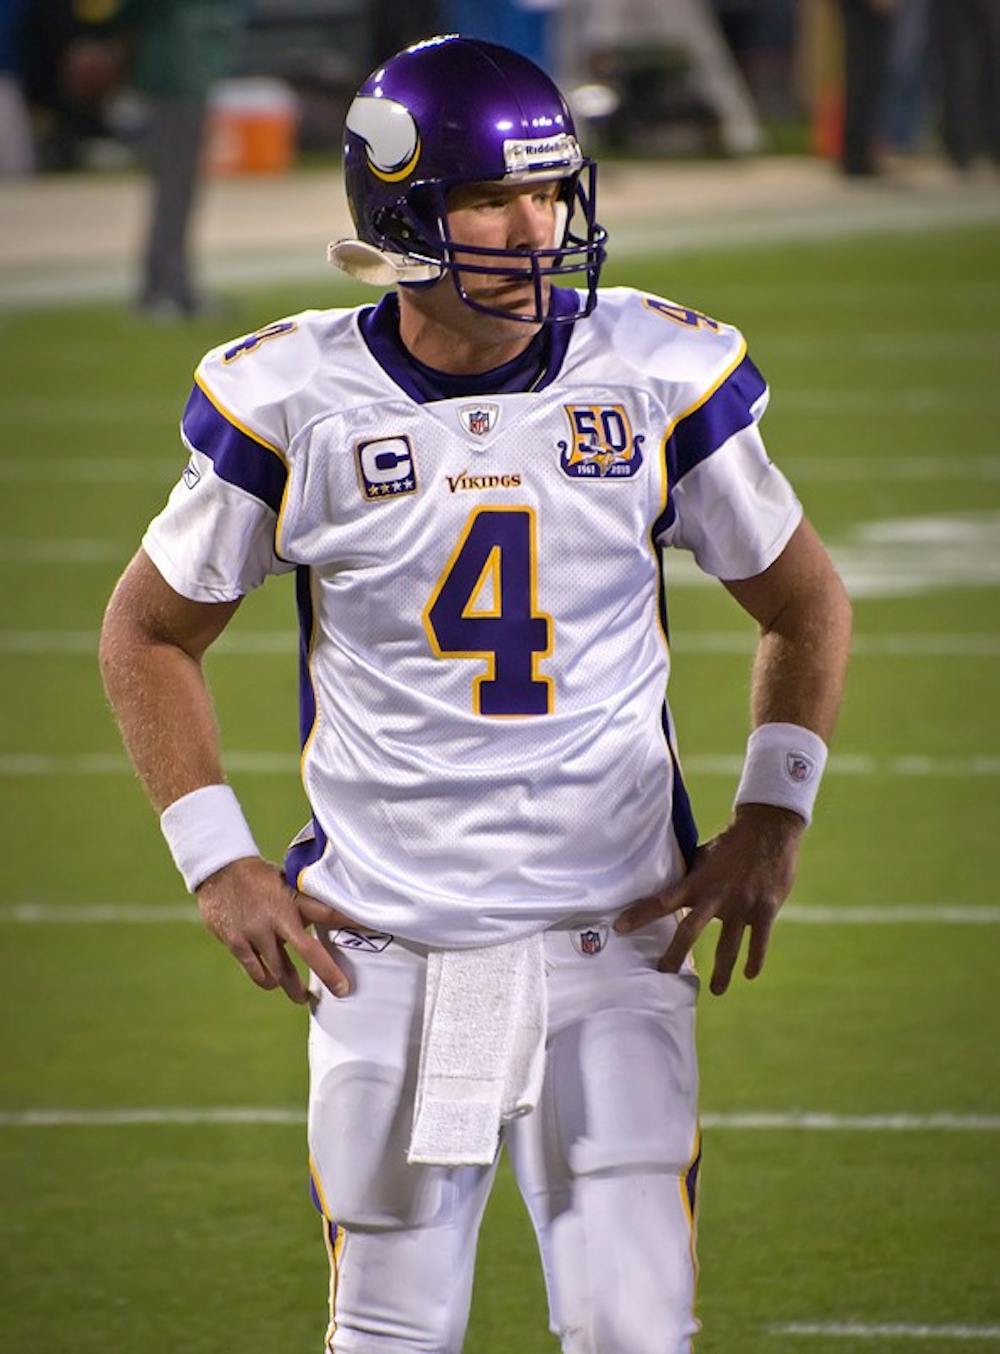 Brett Farve playing at Lambeau Field for the Minnesota Vikings Oct. 24, 2010. Mike Morbeck, photo courtesy 